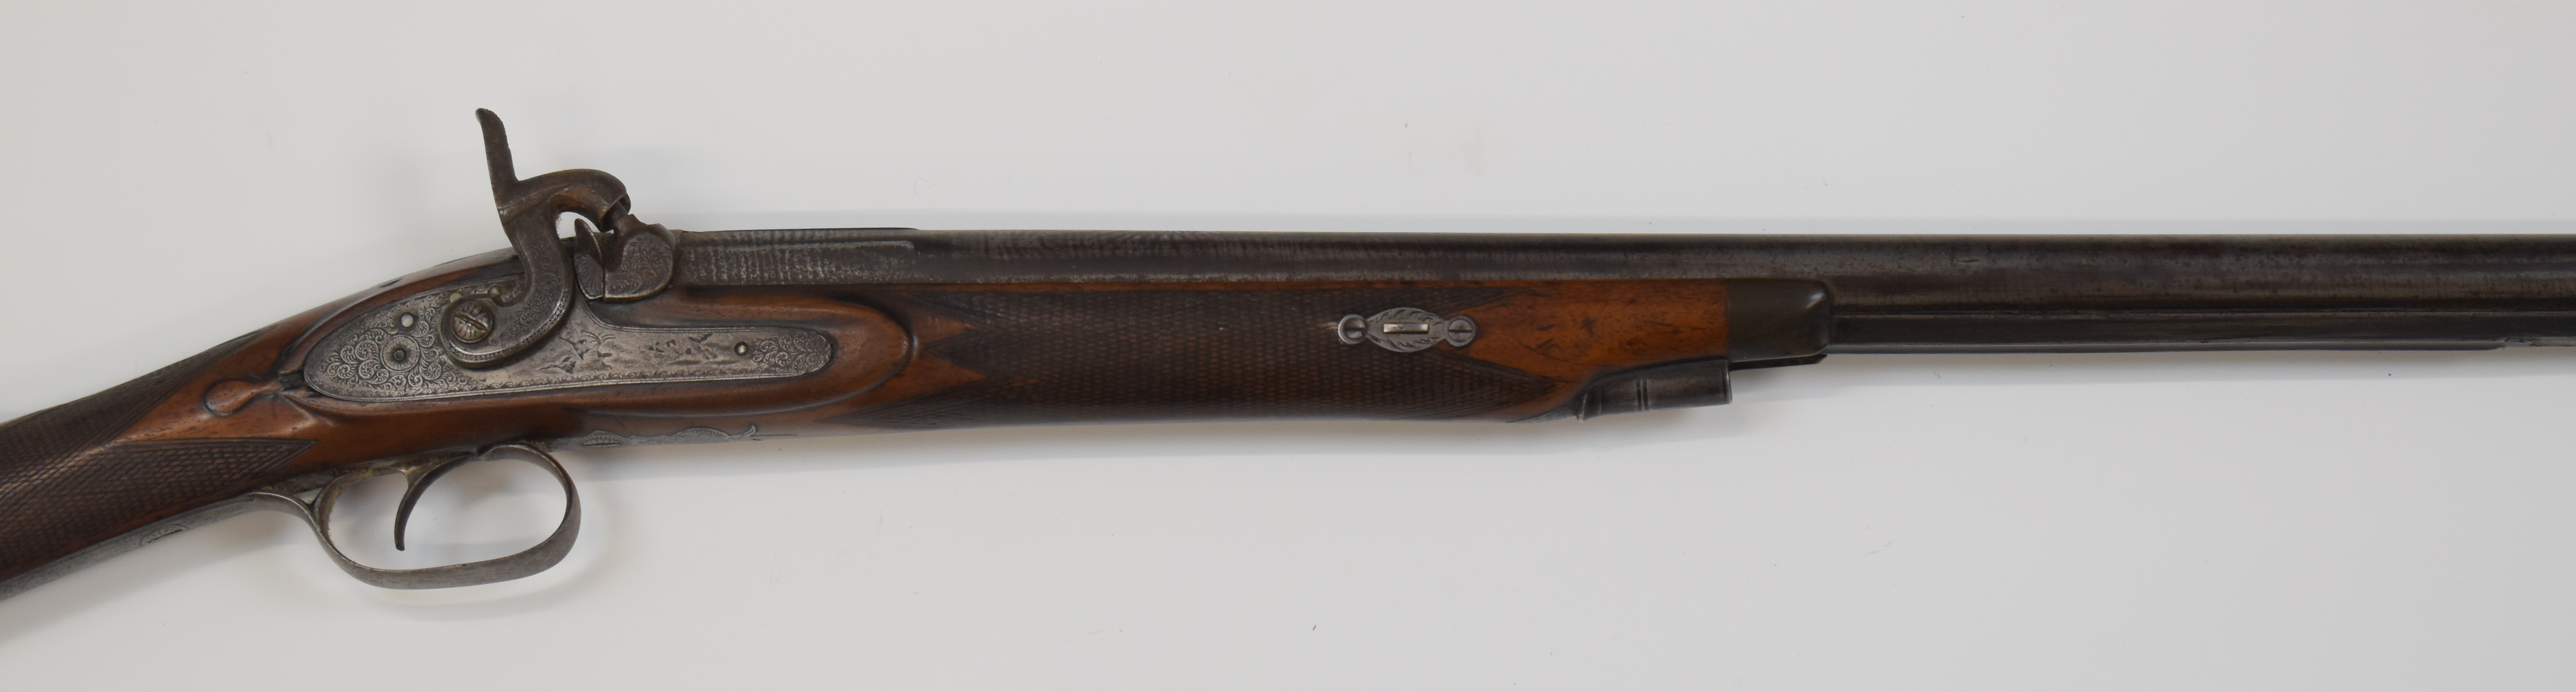 Indistinctly named 12 bore percussion hammer action muzzle loading sporting gun with engraved scenes - Image 4 of 10